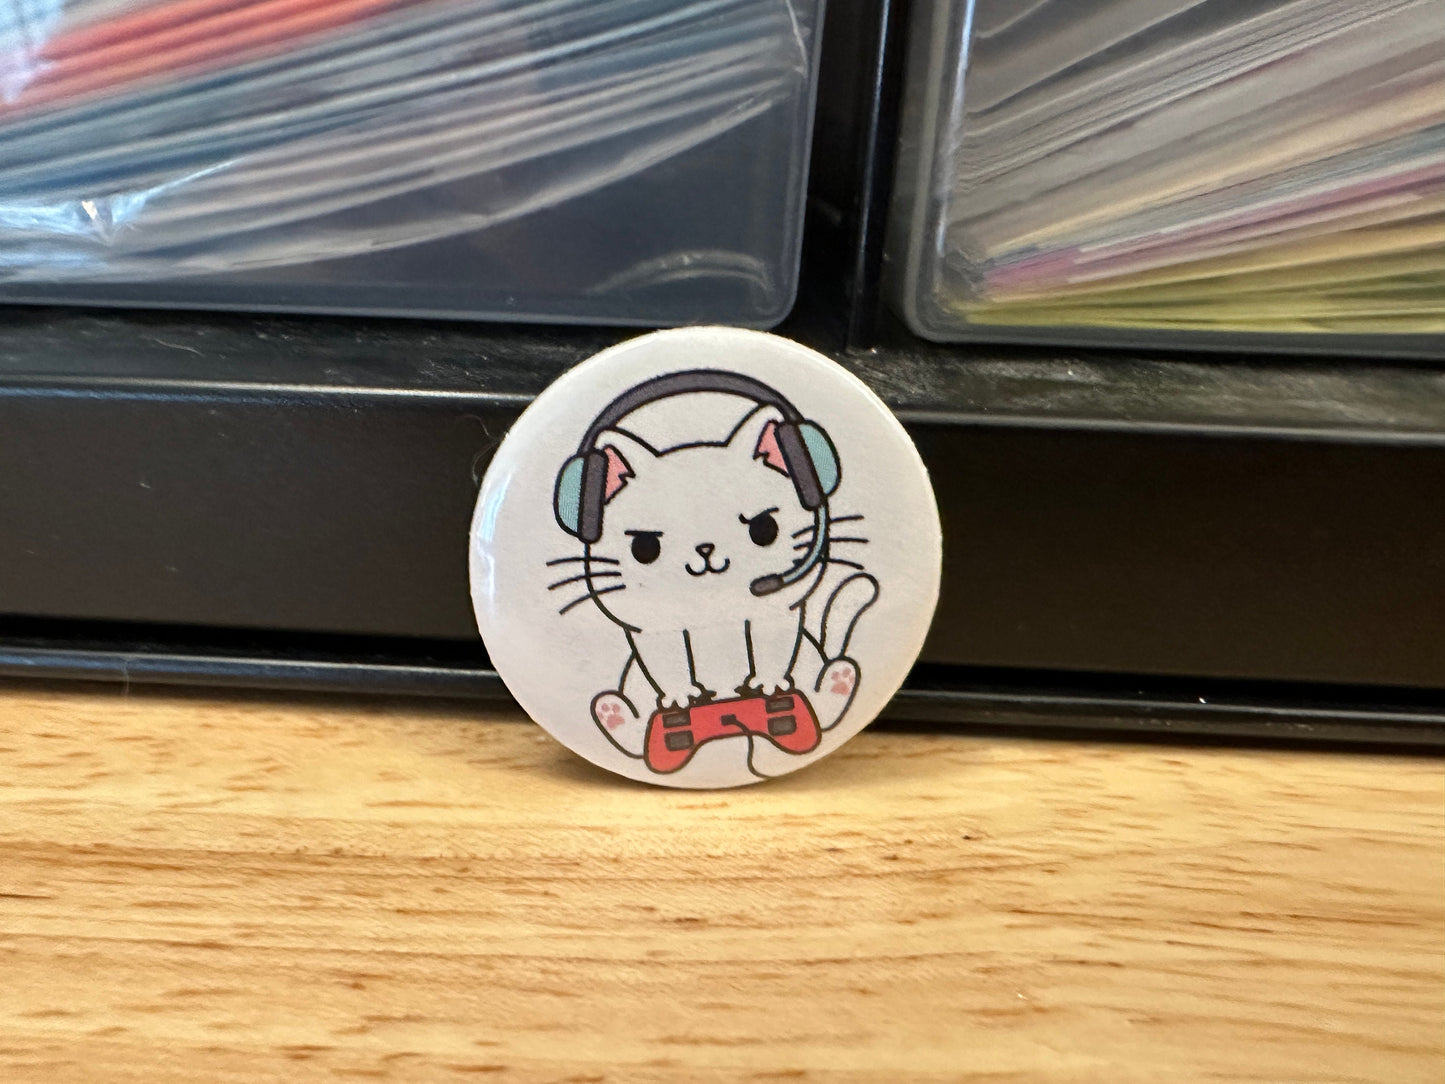 Gaming Cat 2.25" Button Pins or 1.25" Button options, Back Pack Decoration, Cat Pin, Cat designed pinback, Cat gamer pin